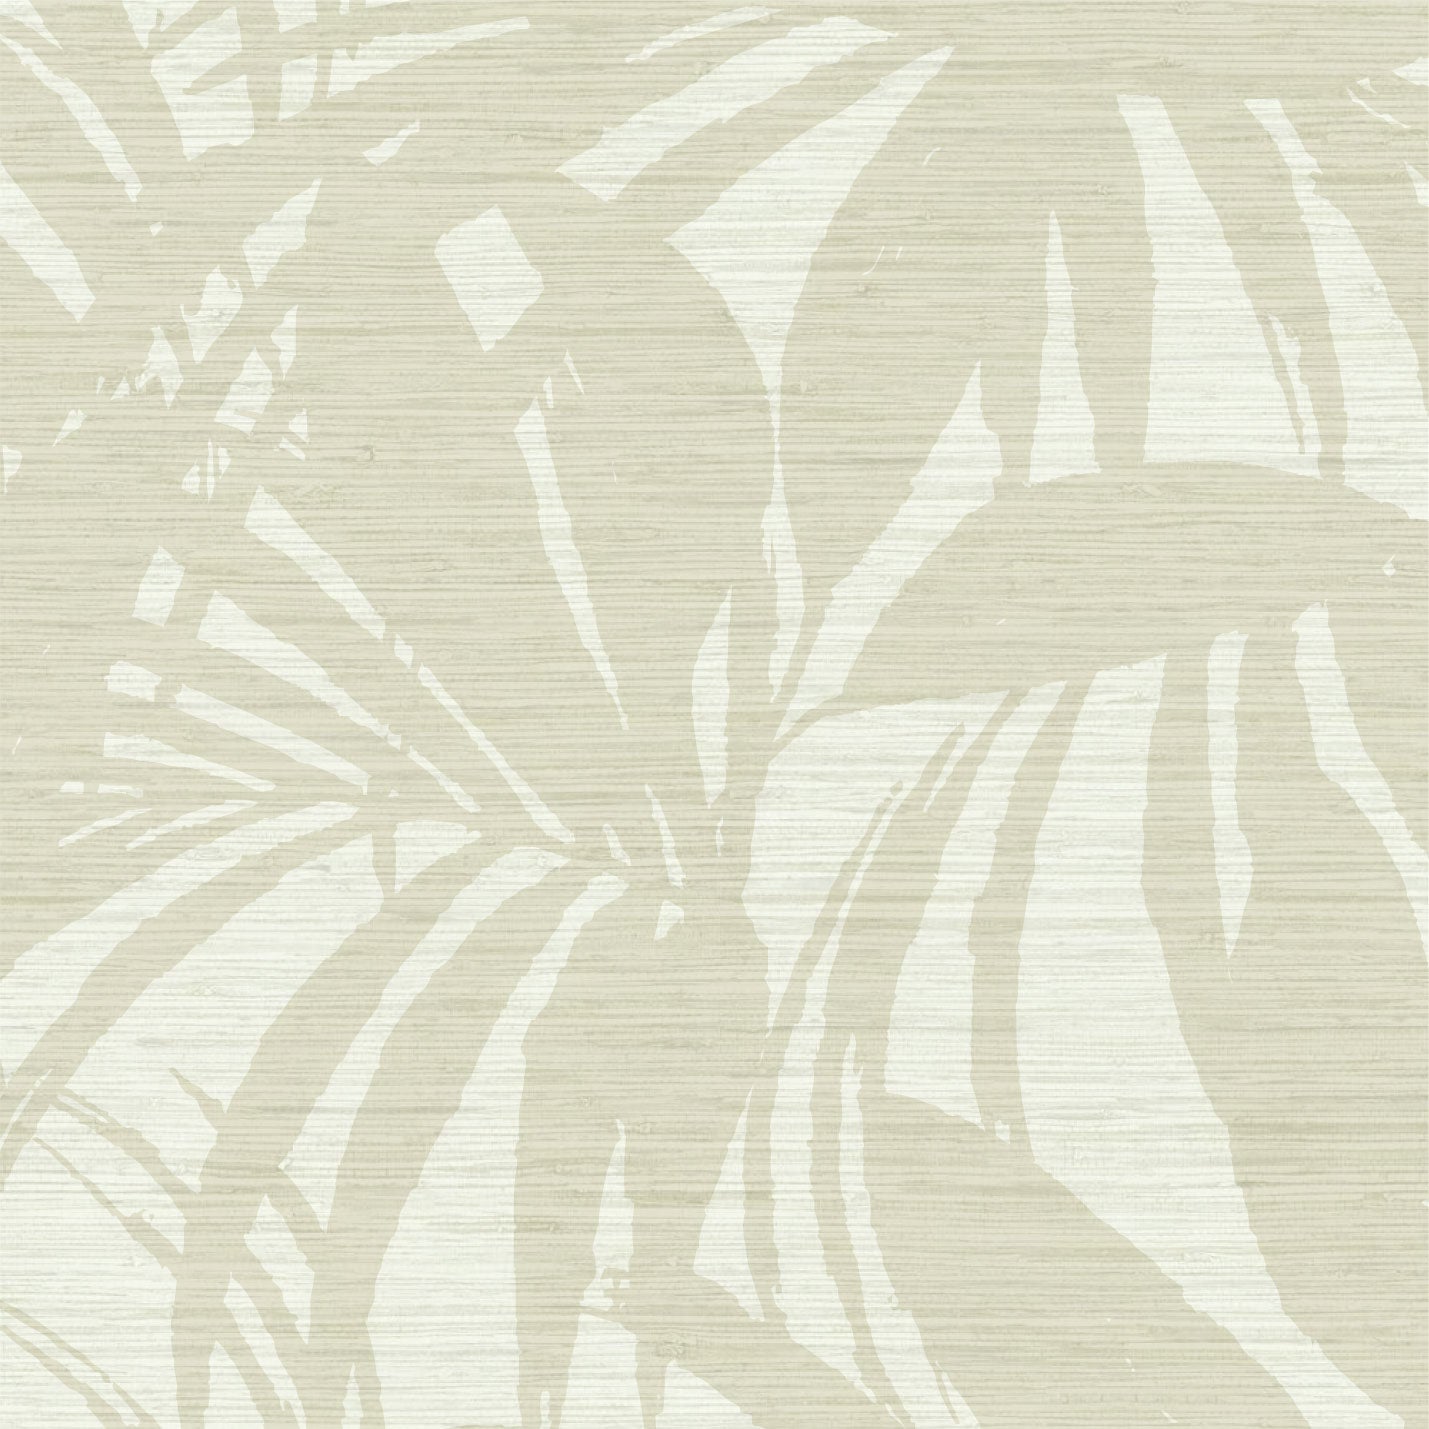 printed grasscloth wallpaper oversize tropical leaf Natural Textured Eco-Friendly Non-toxic High-quality  Sustainable practices Sustainability Interior Design Wall covering Bold retro chic custom jungle garden botanical Seaside Coastal Seashore Waterfront Vacation home styling Retreat Relaxed beach vibes Beach cottage Shoreline Oceanfront white tan sand off-white neutral